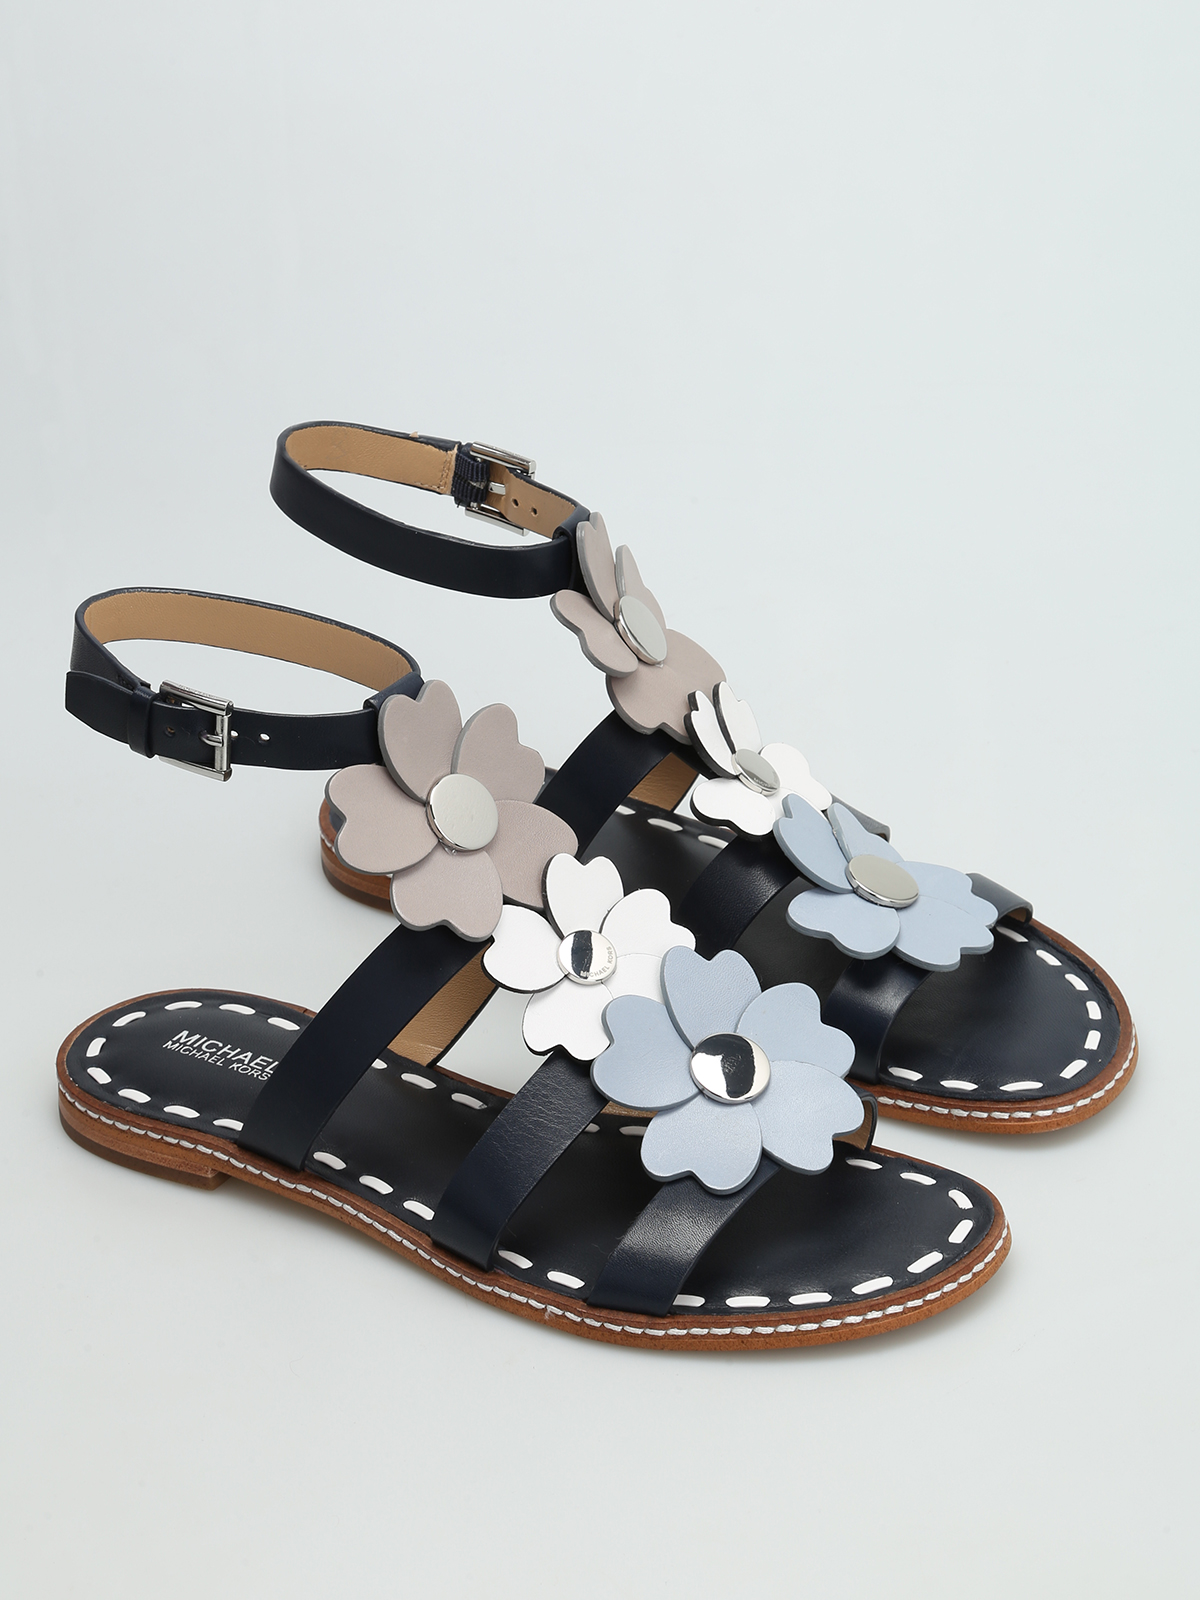 michael kors sandals with flowers